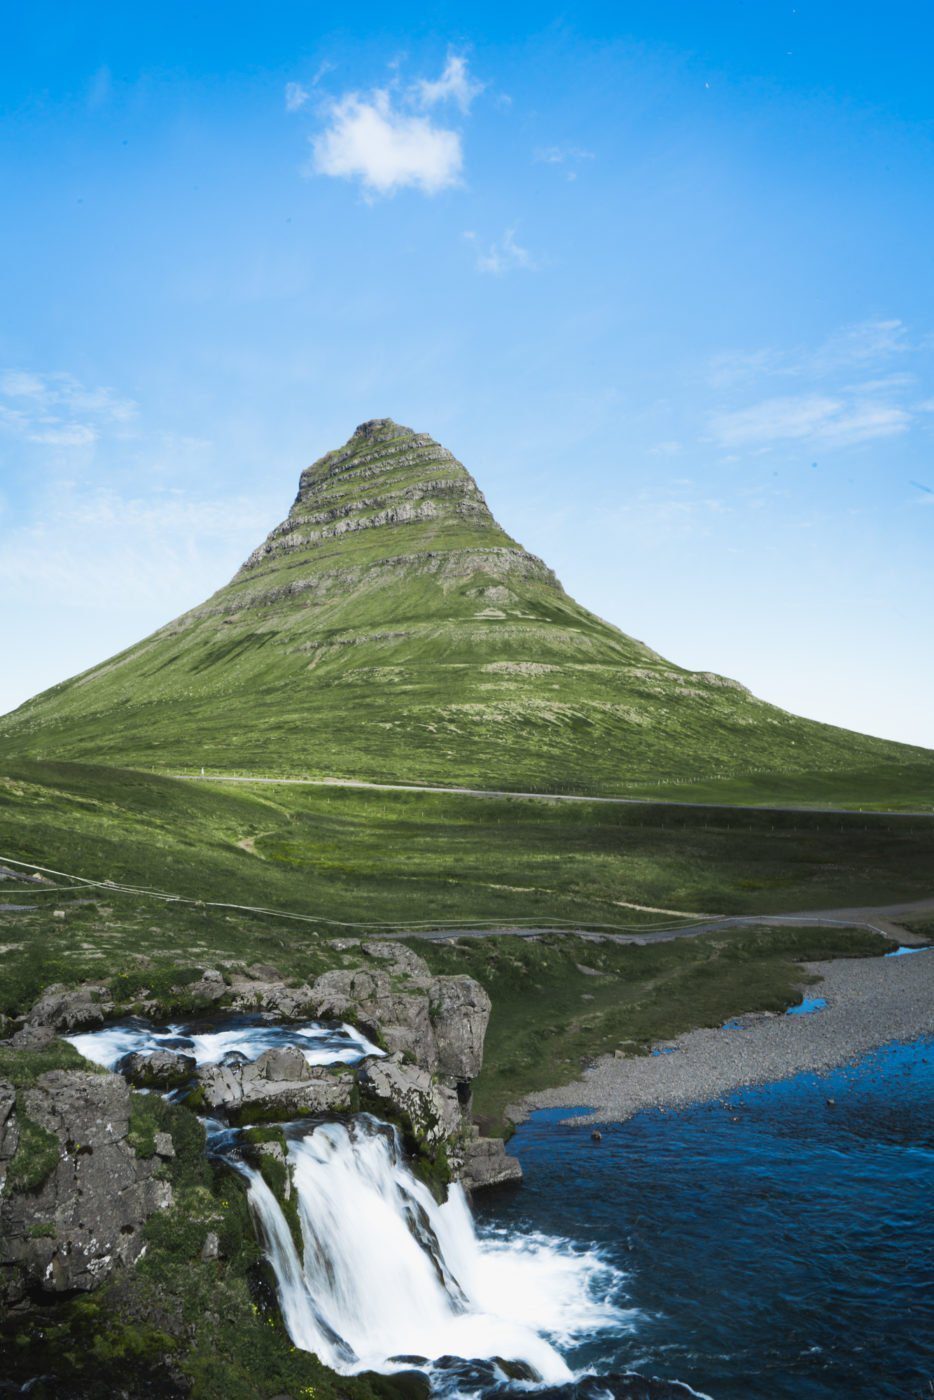 On a day trip to Snaefellsnes, you'll see the iconic Kirkjufell mountain